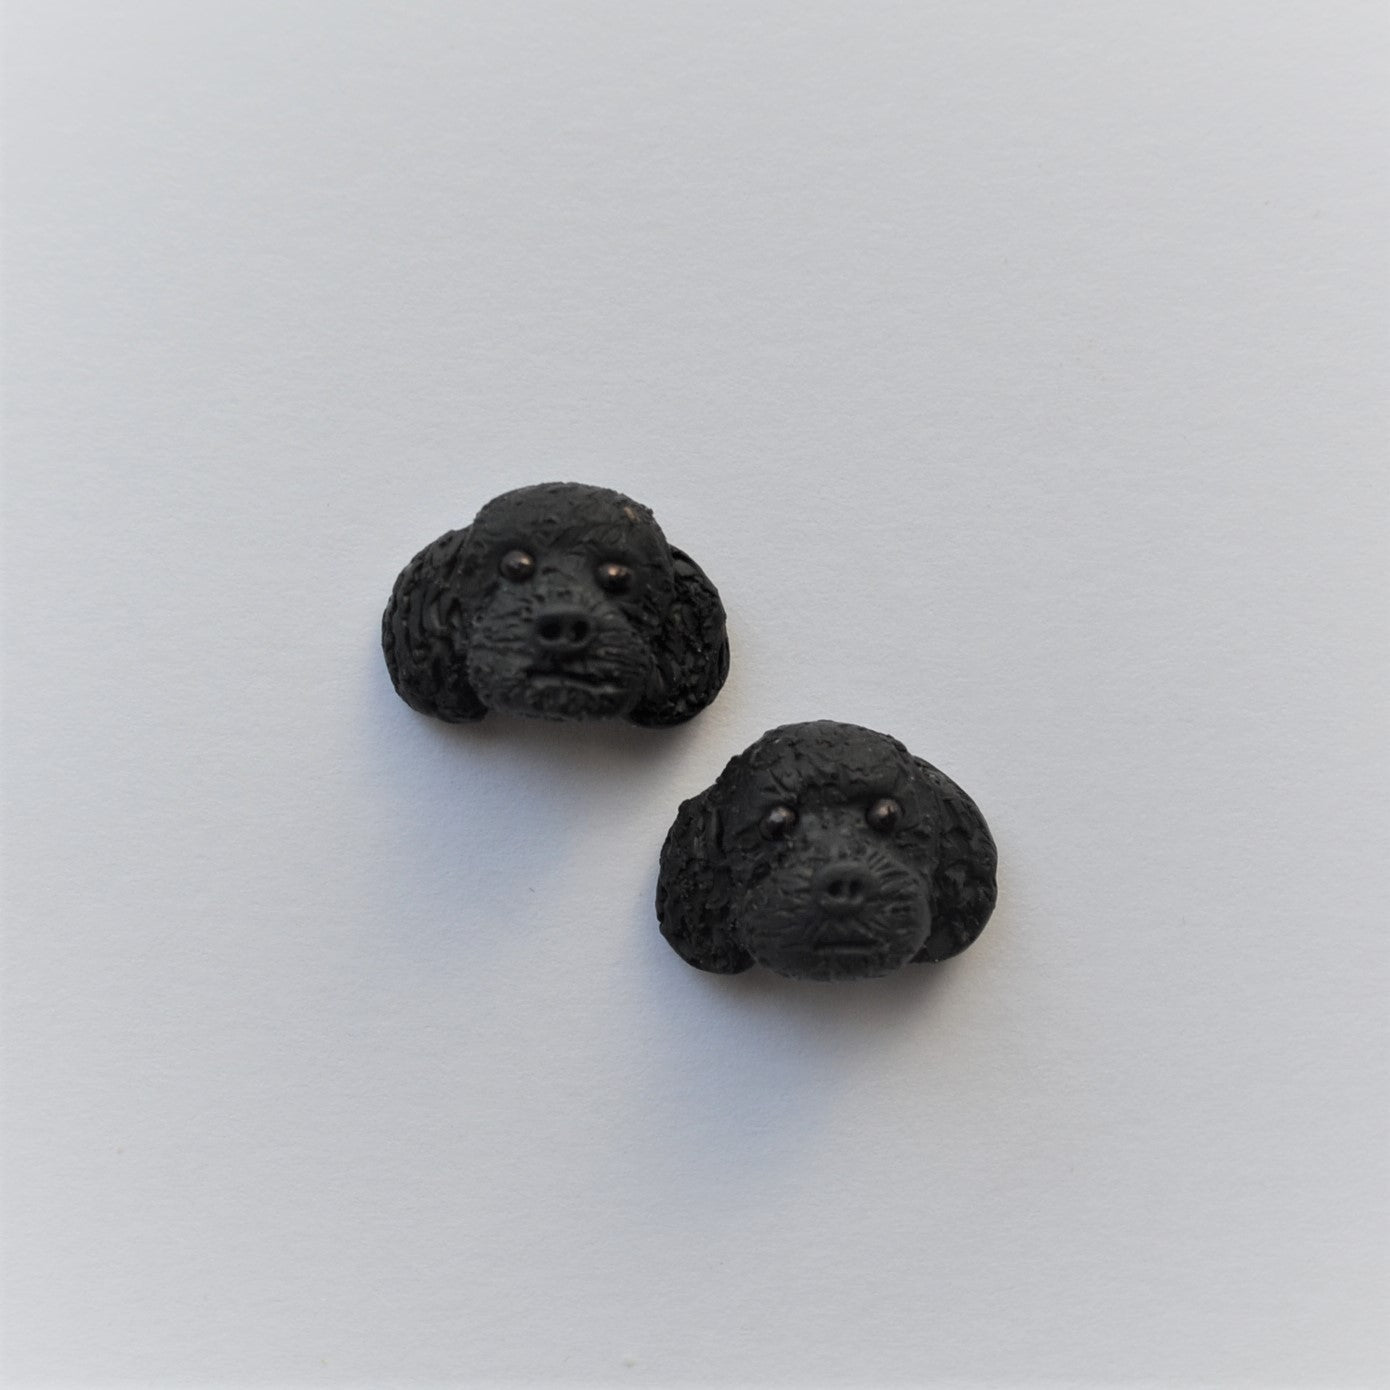 Handmade polymer clay black poodle stud earrings shown offset on white background